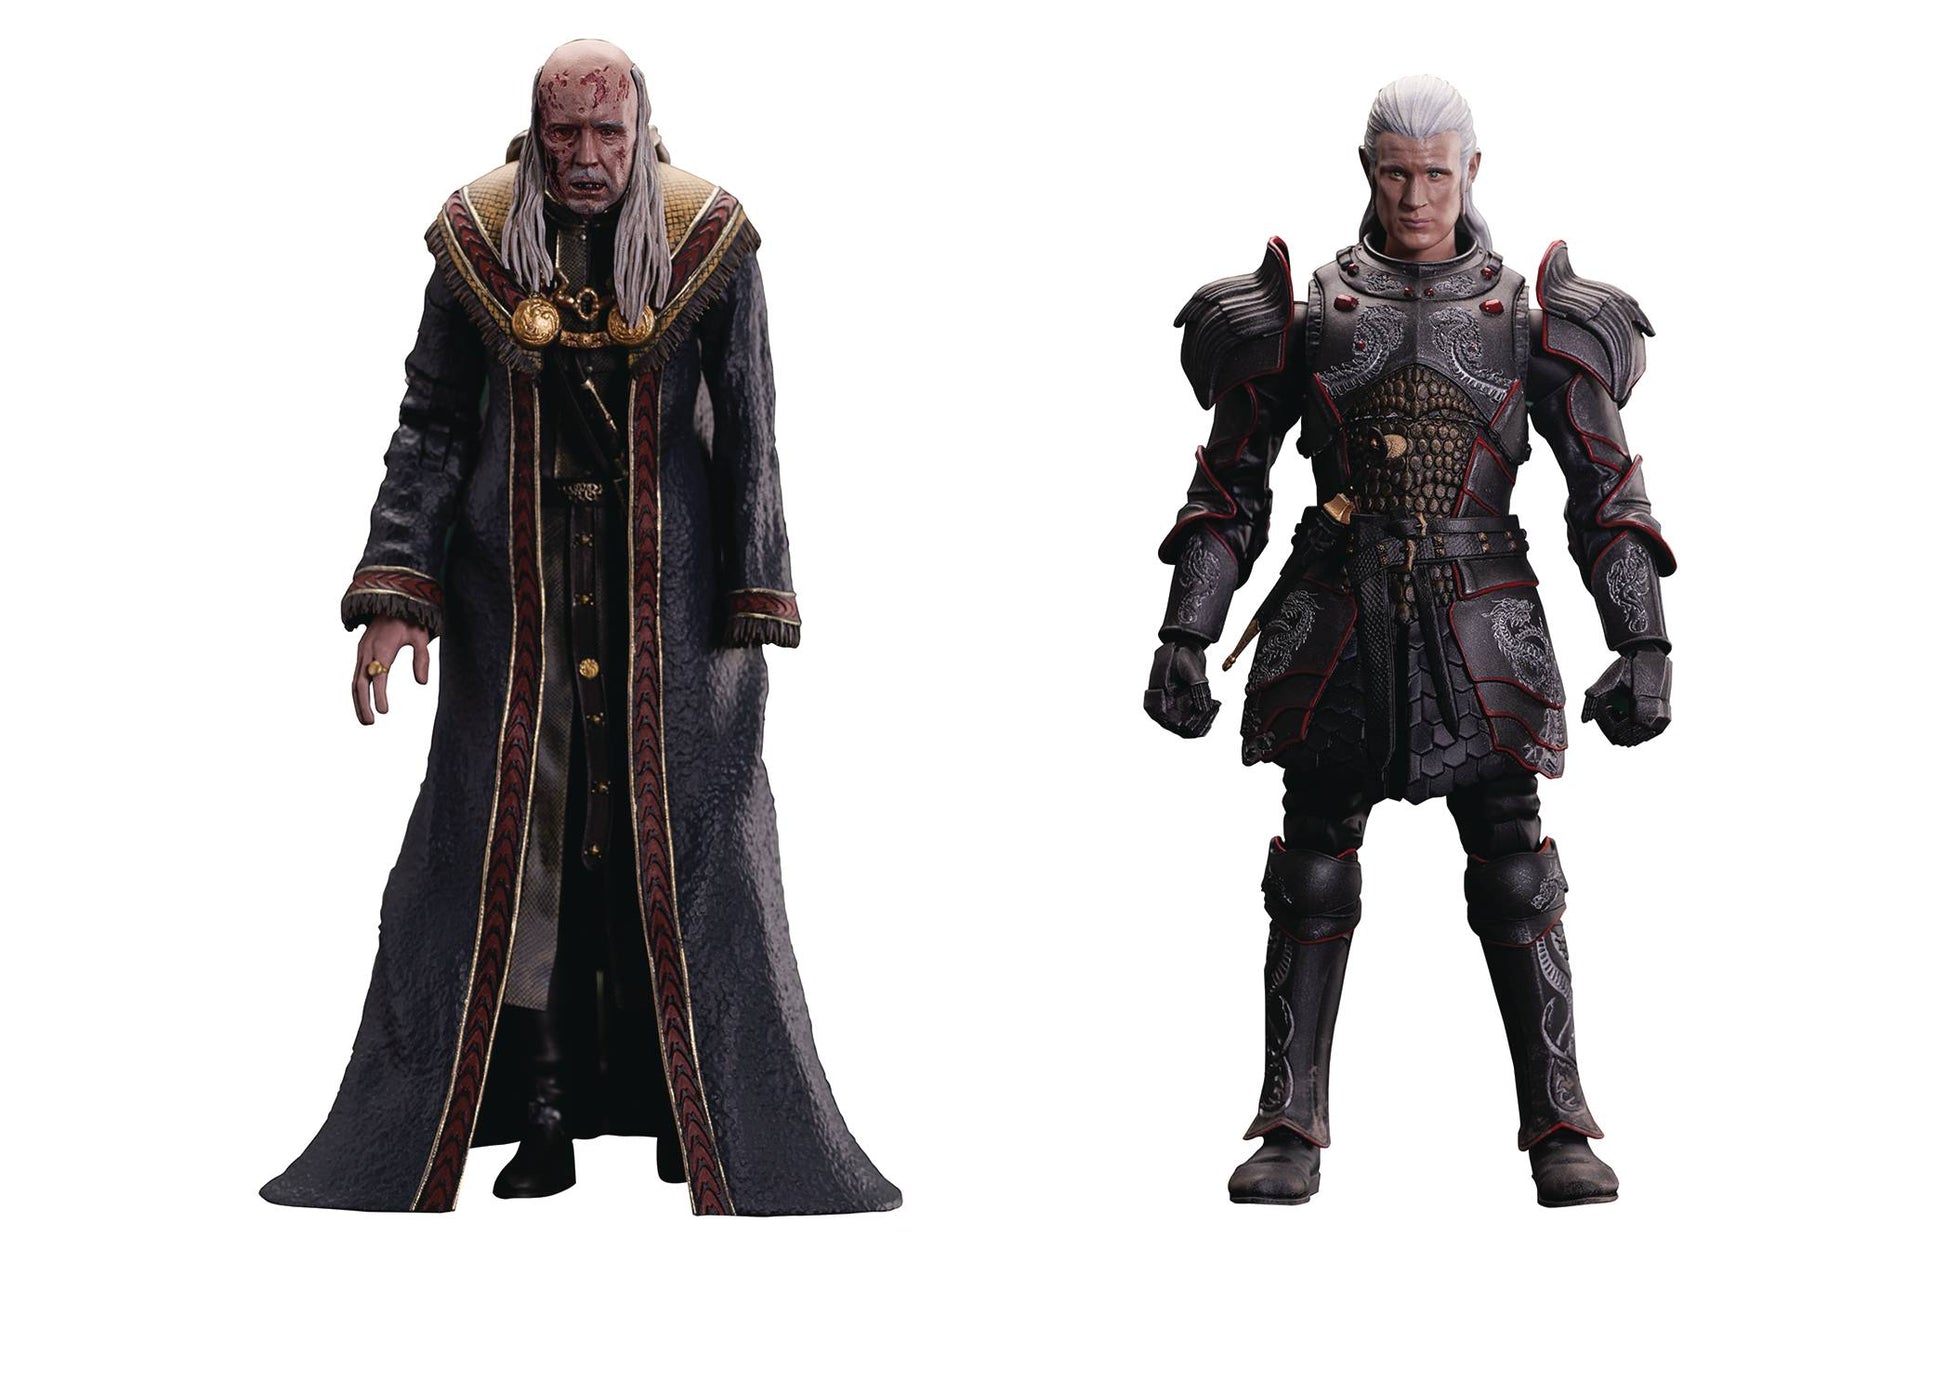 First Action Figures From Diamond Select Toys for House of the Dragon. :  r/HouseOfTheDragon